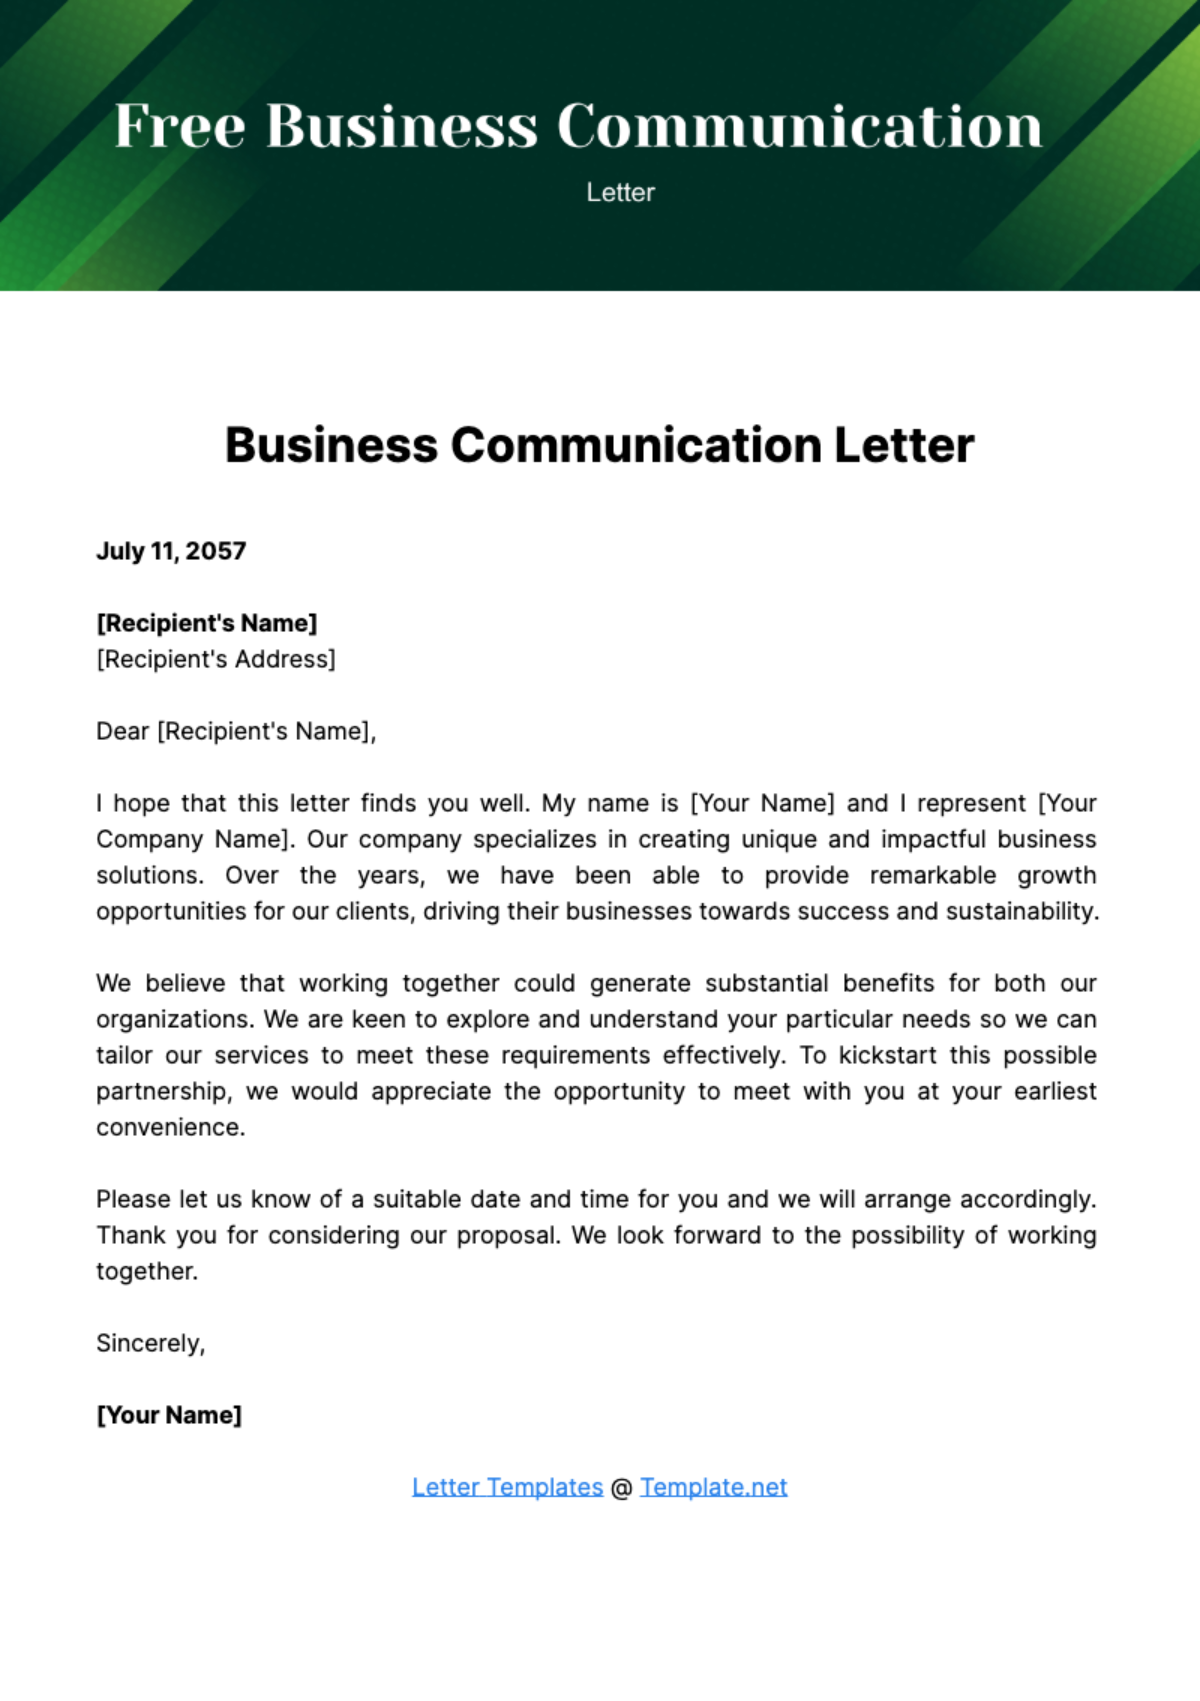 Free Business Communication Letter Template